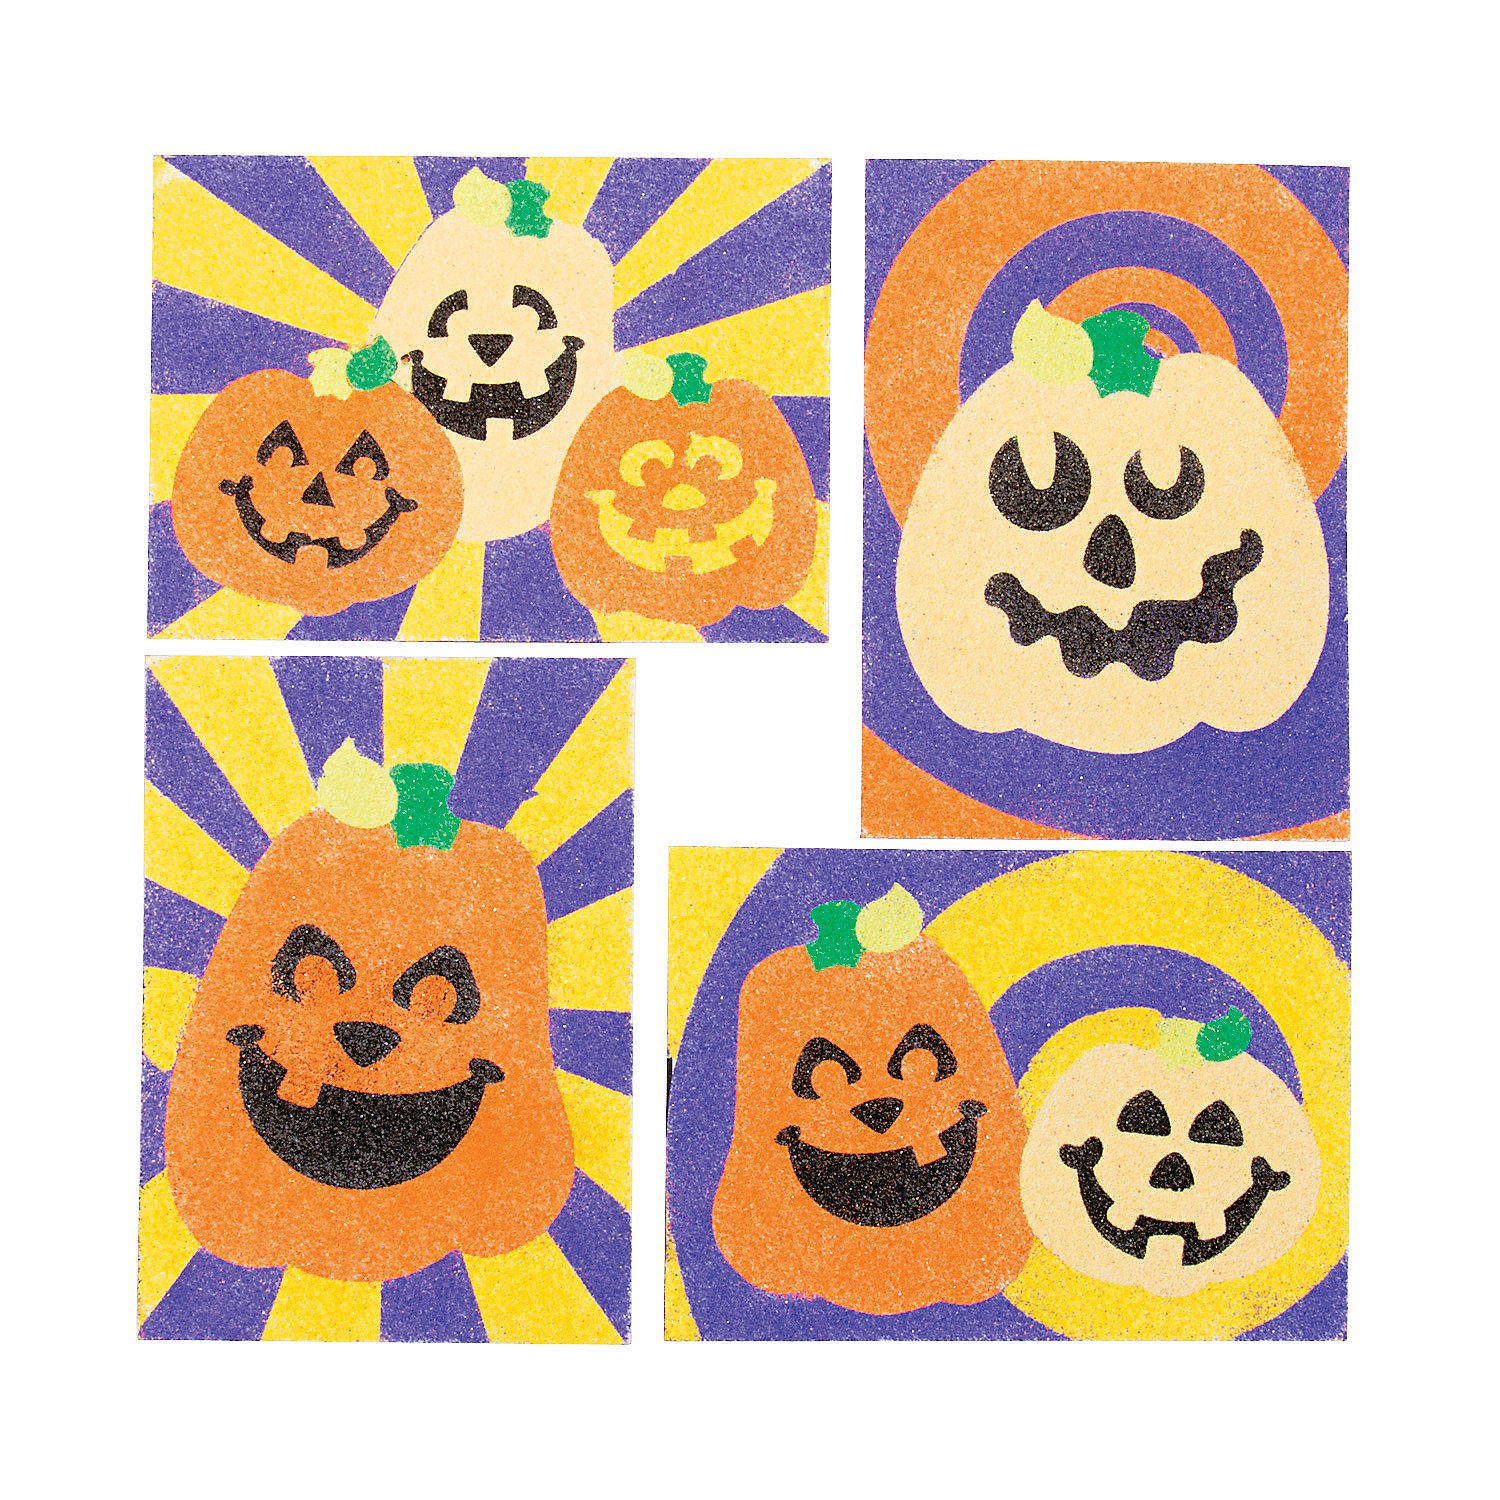 Jack O Lantern Sand Art Sheets - Crafts for Kids and Fun Home Activities